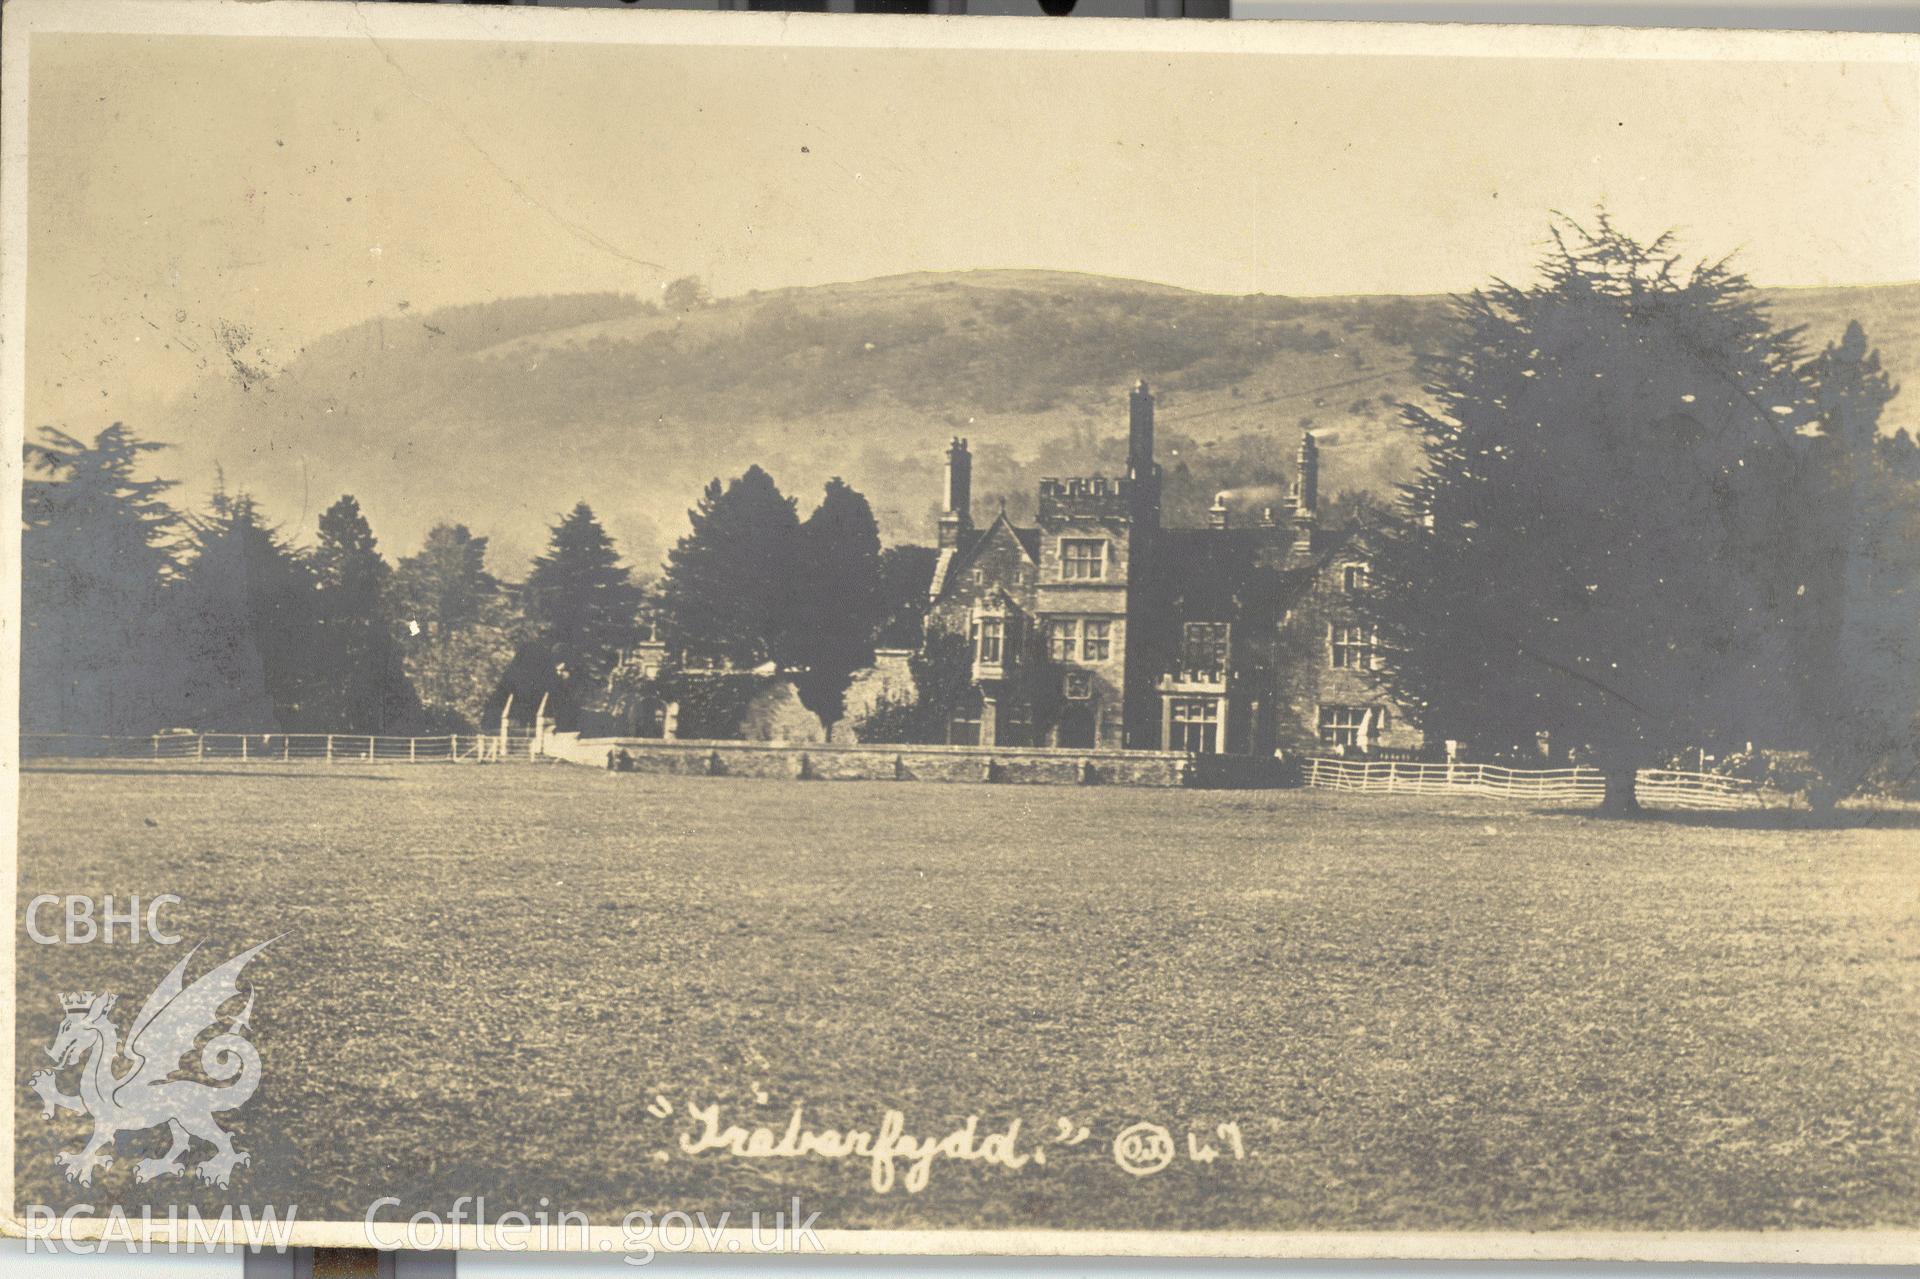 Digitised postcard image of Treberfydd, Llangors, O. Jackson, Wellington Studio, Brecon and Ennig Bazaar, Talgarth. Produced by Parks and Gardens Data Services, from an original item in the Peter Davis Collection at Parks and Gardens UK. We hold only web-resolution images of this collection, suitable for viewing on screen and for research purposes only. We do not hold the original images, or publication quality scans.